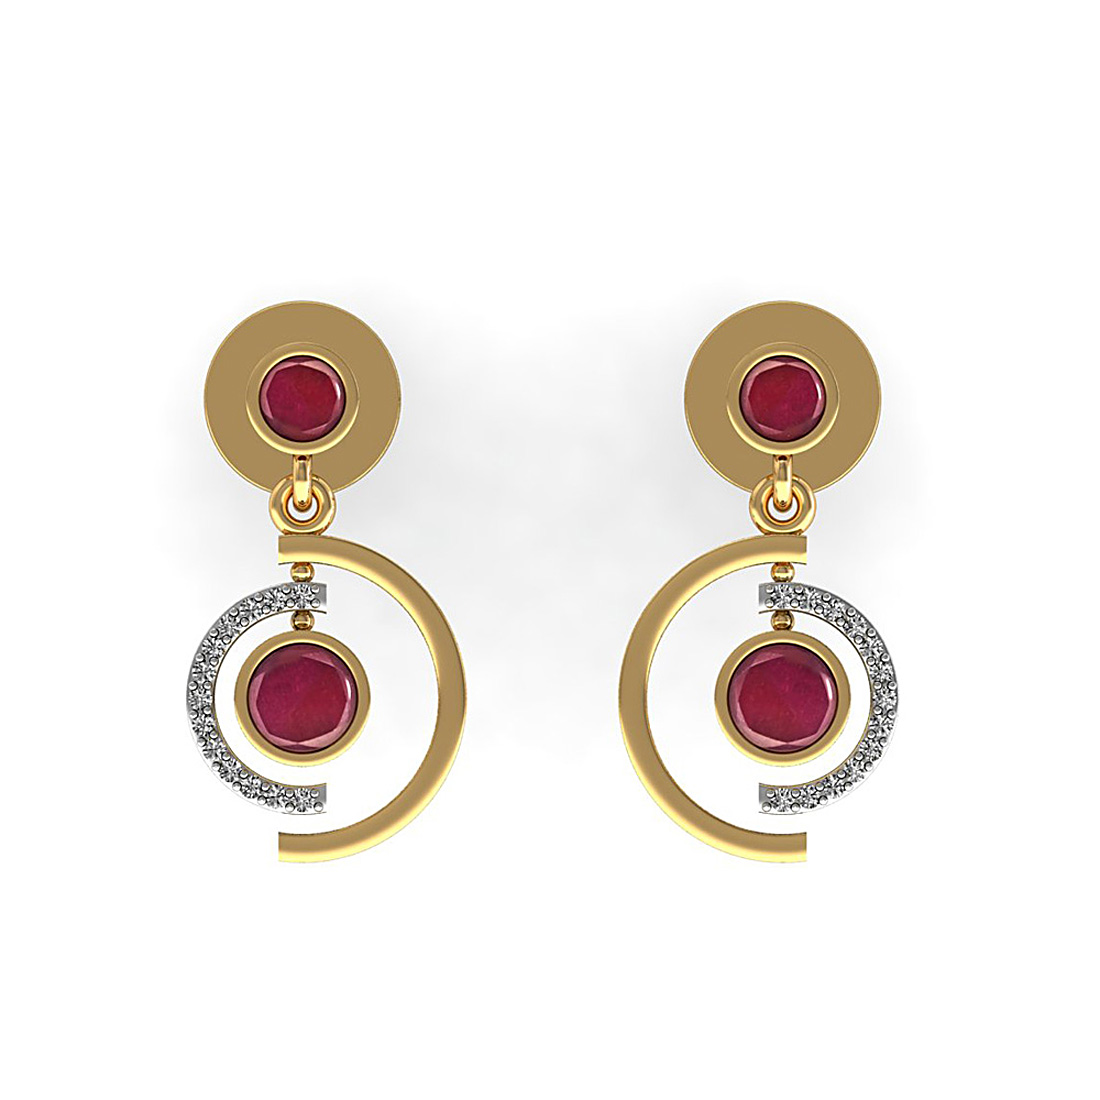 Genuine diamond stud earrings made in 18k solid gold with ruby